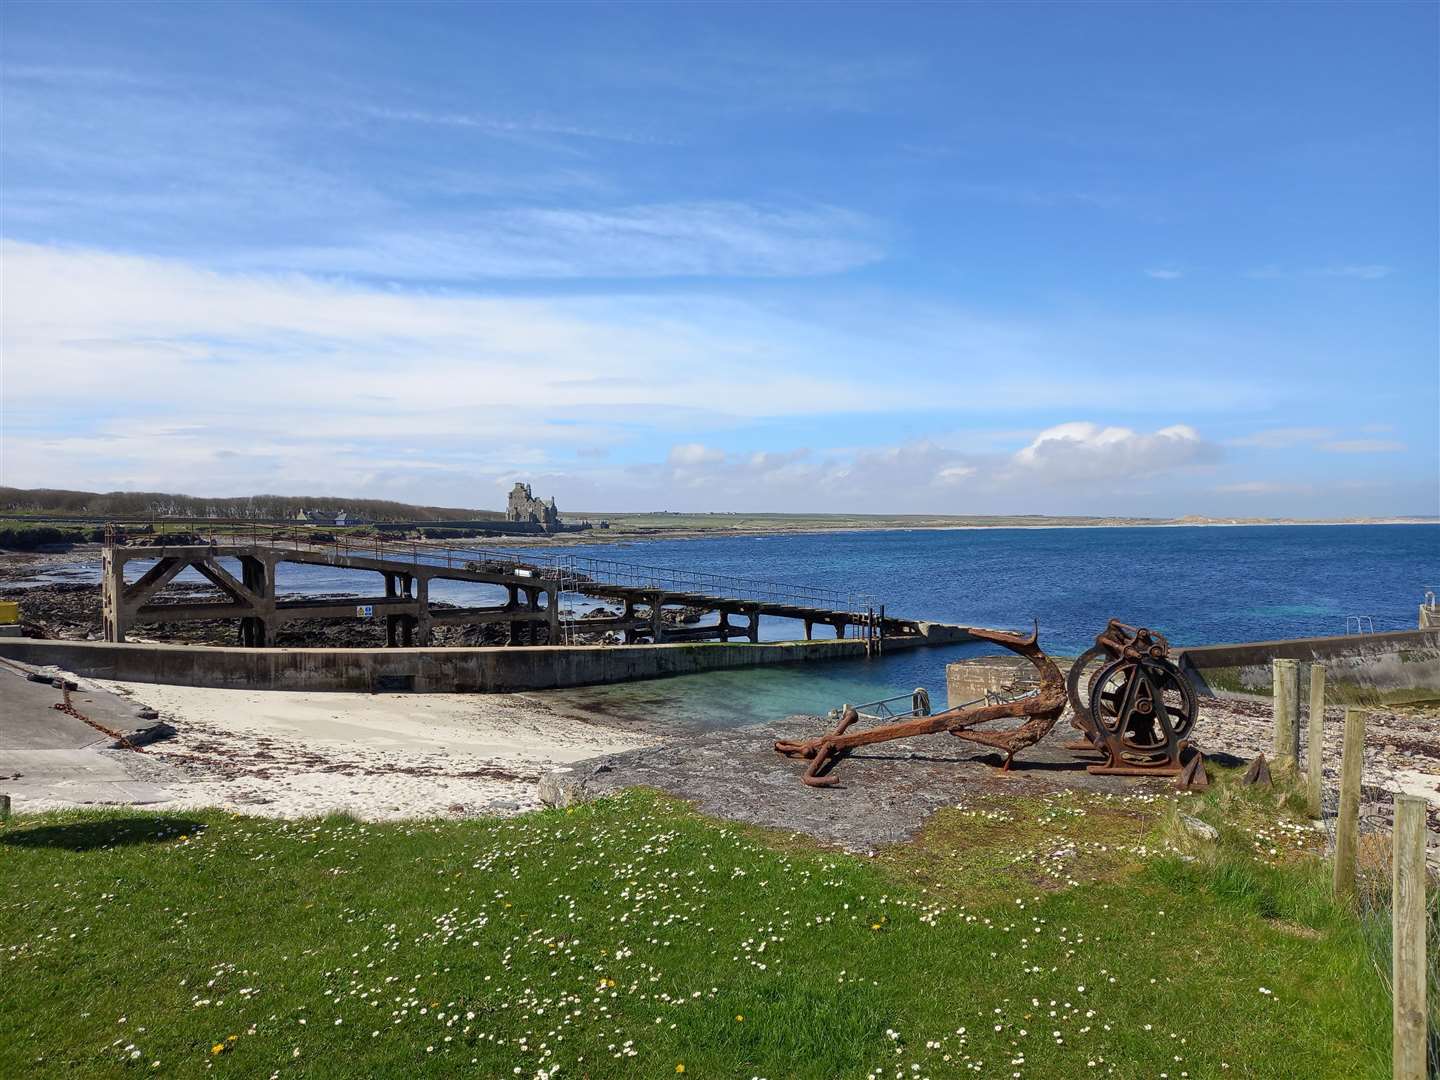 Matthew Towe sent this photograph of a beautiful late April afternoon at Ackergill Harbour.